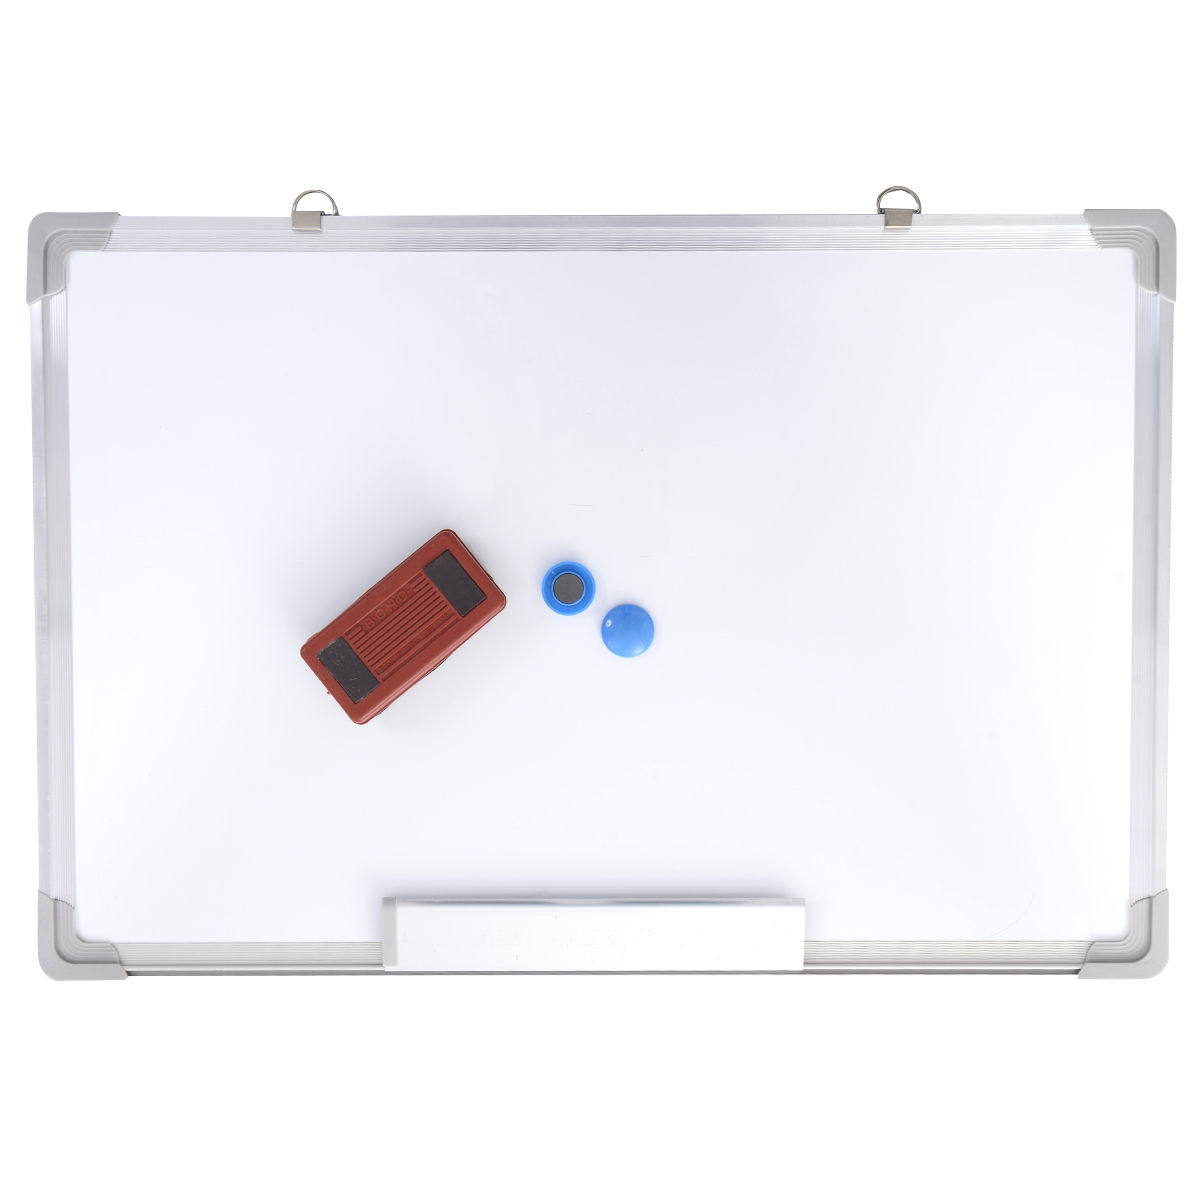 Single Side Magnetic Writing Whiteboard|Smooth Writing Magnetic Whiteboard